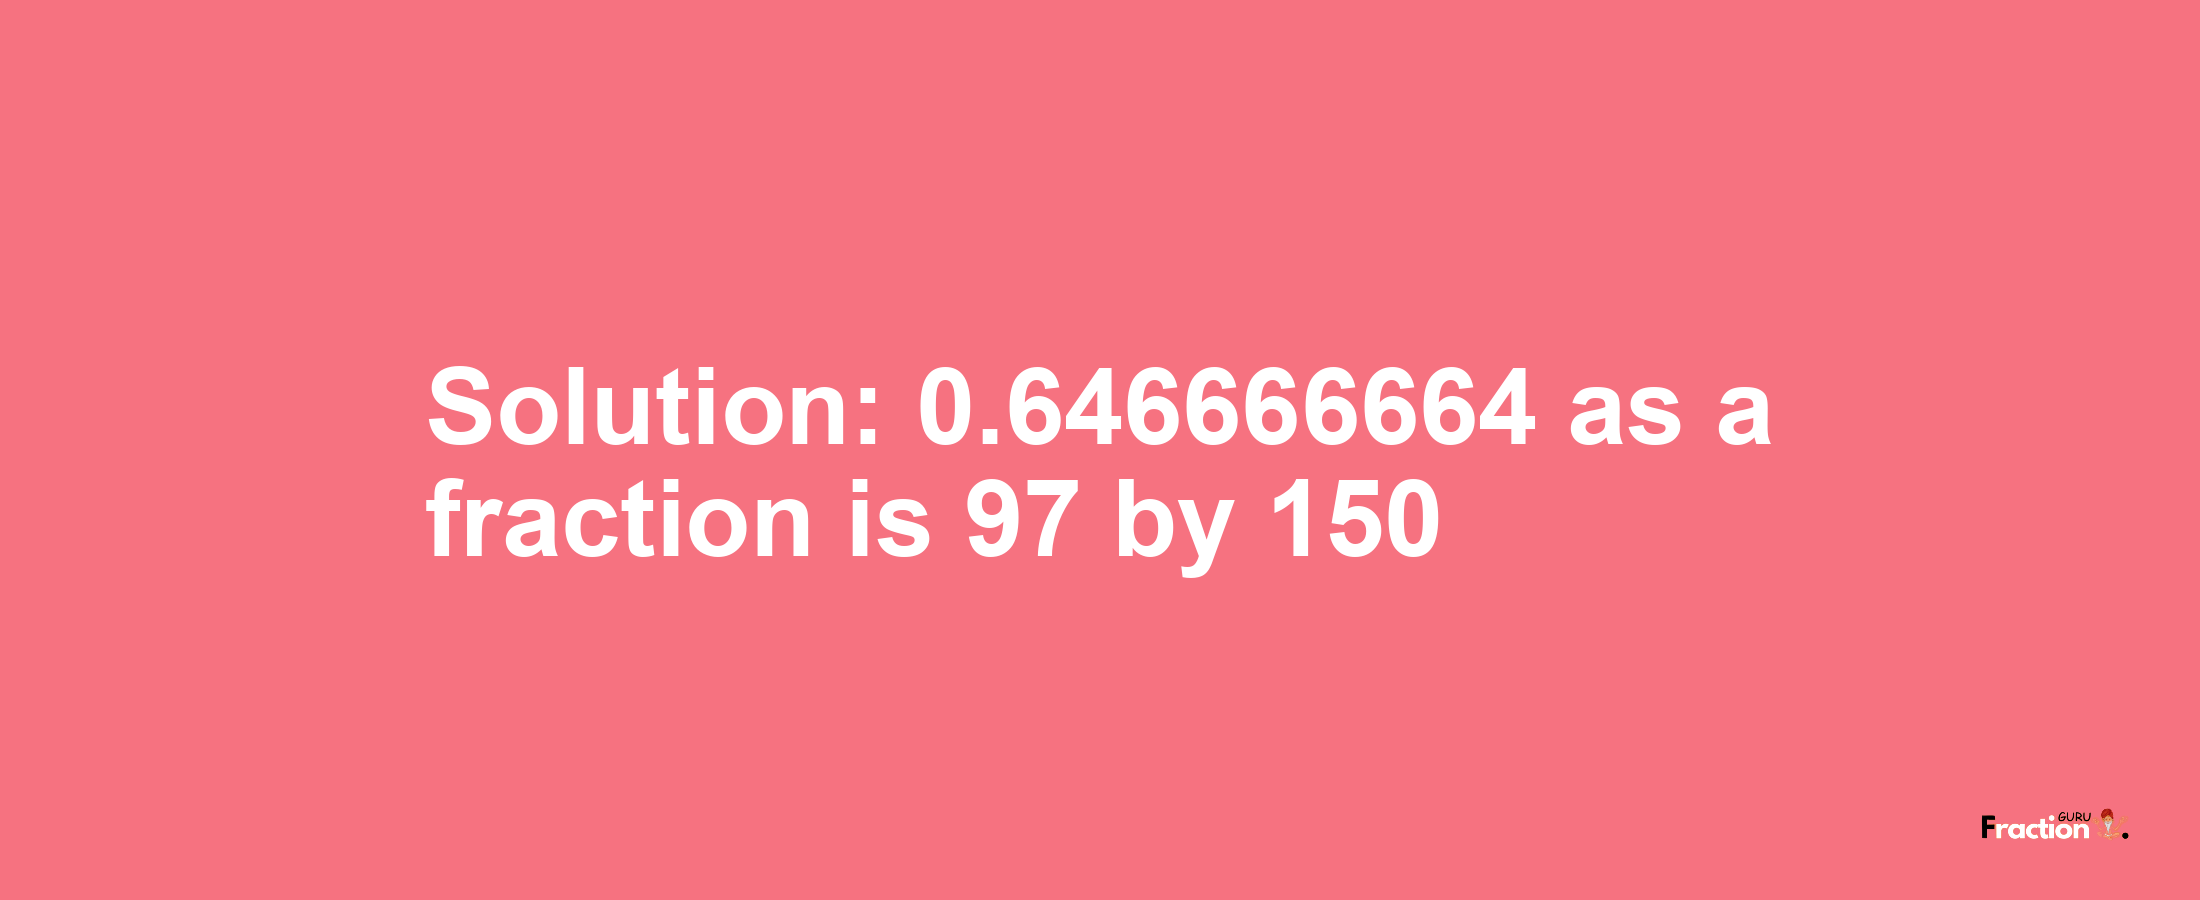 Solution:0.646666664 as a fraction is 97/150